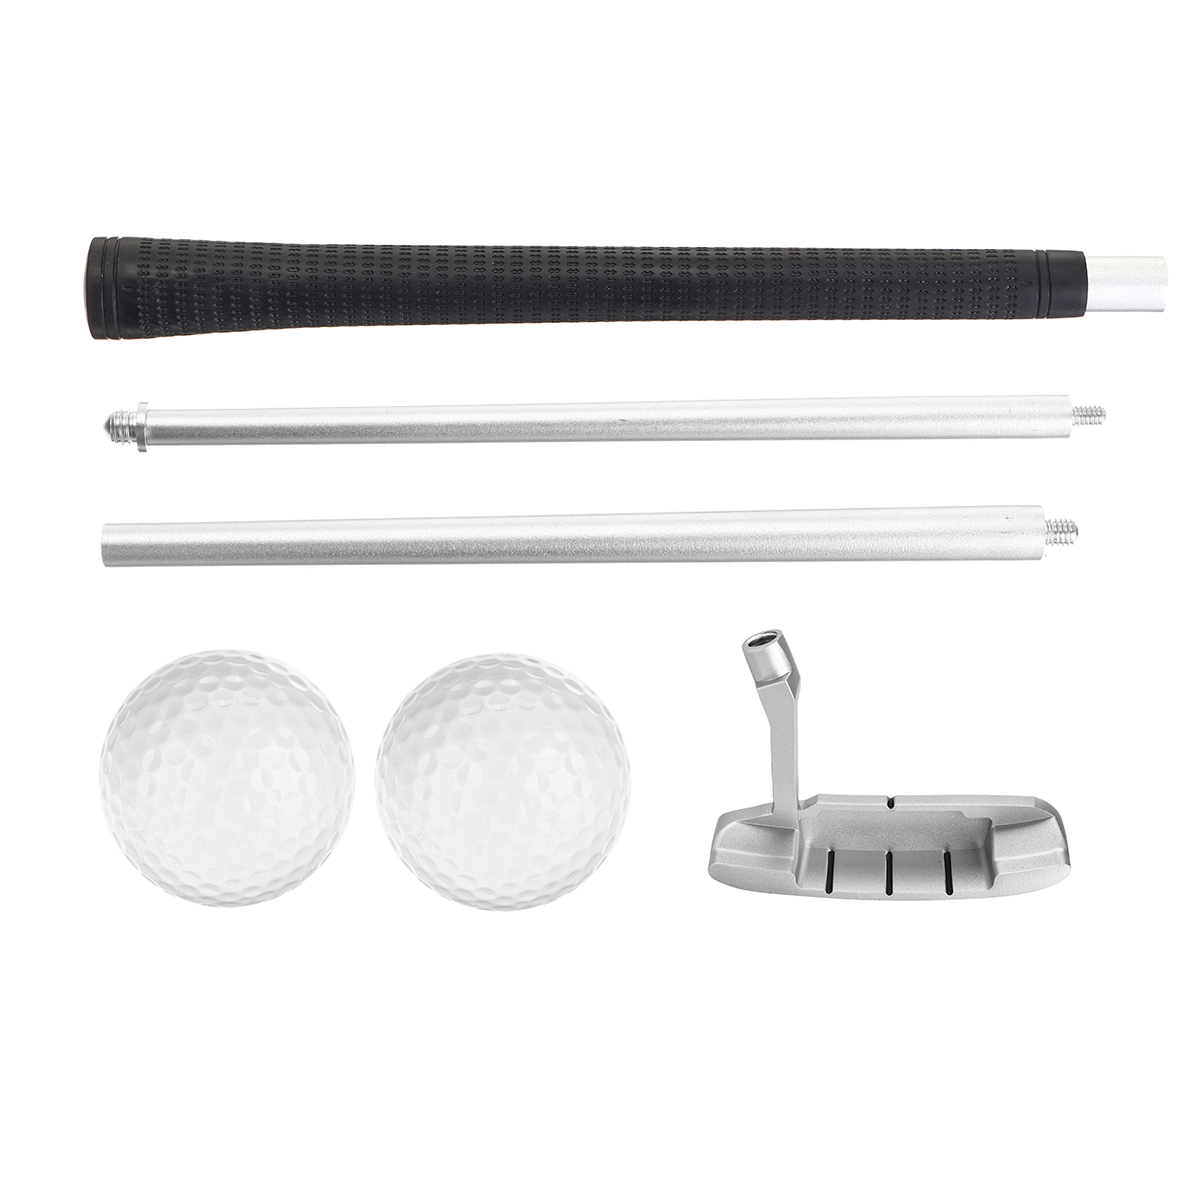 Removable-Golf-Alignment-Stick-Chipping-Swing-Trainer-Sport-Golf-Pole-with-Golf-Ball-1707297-8